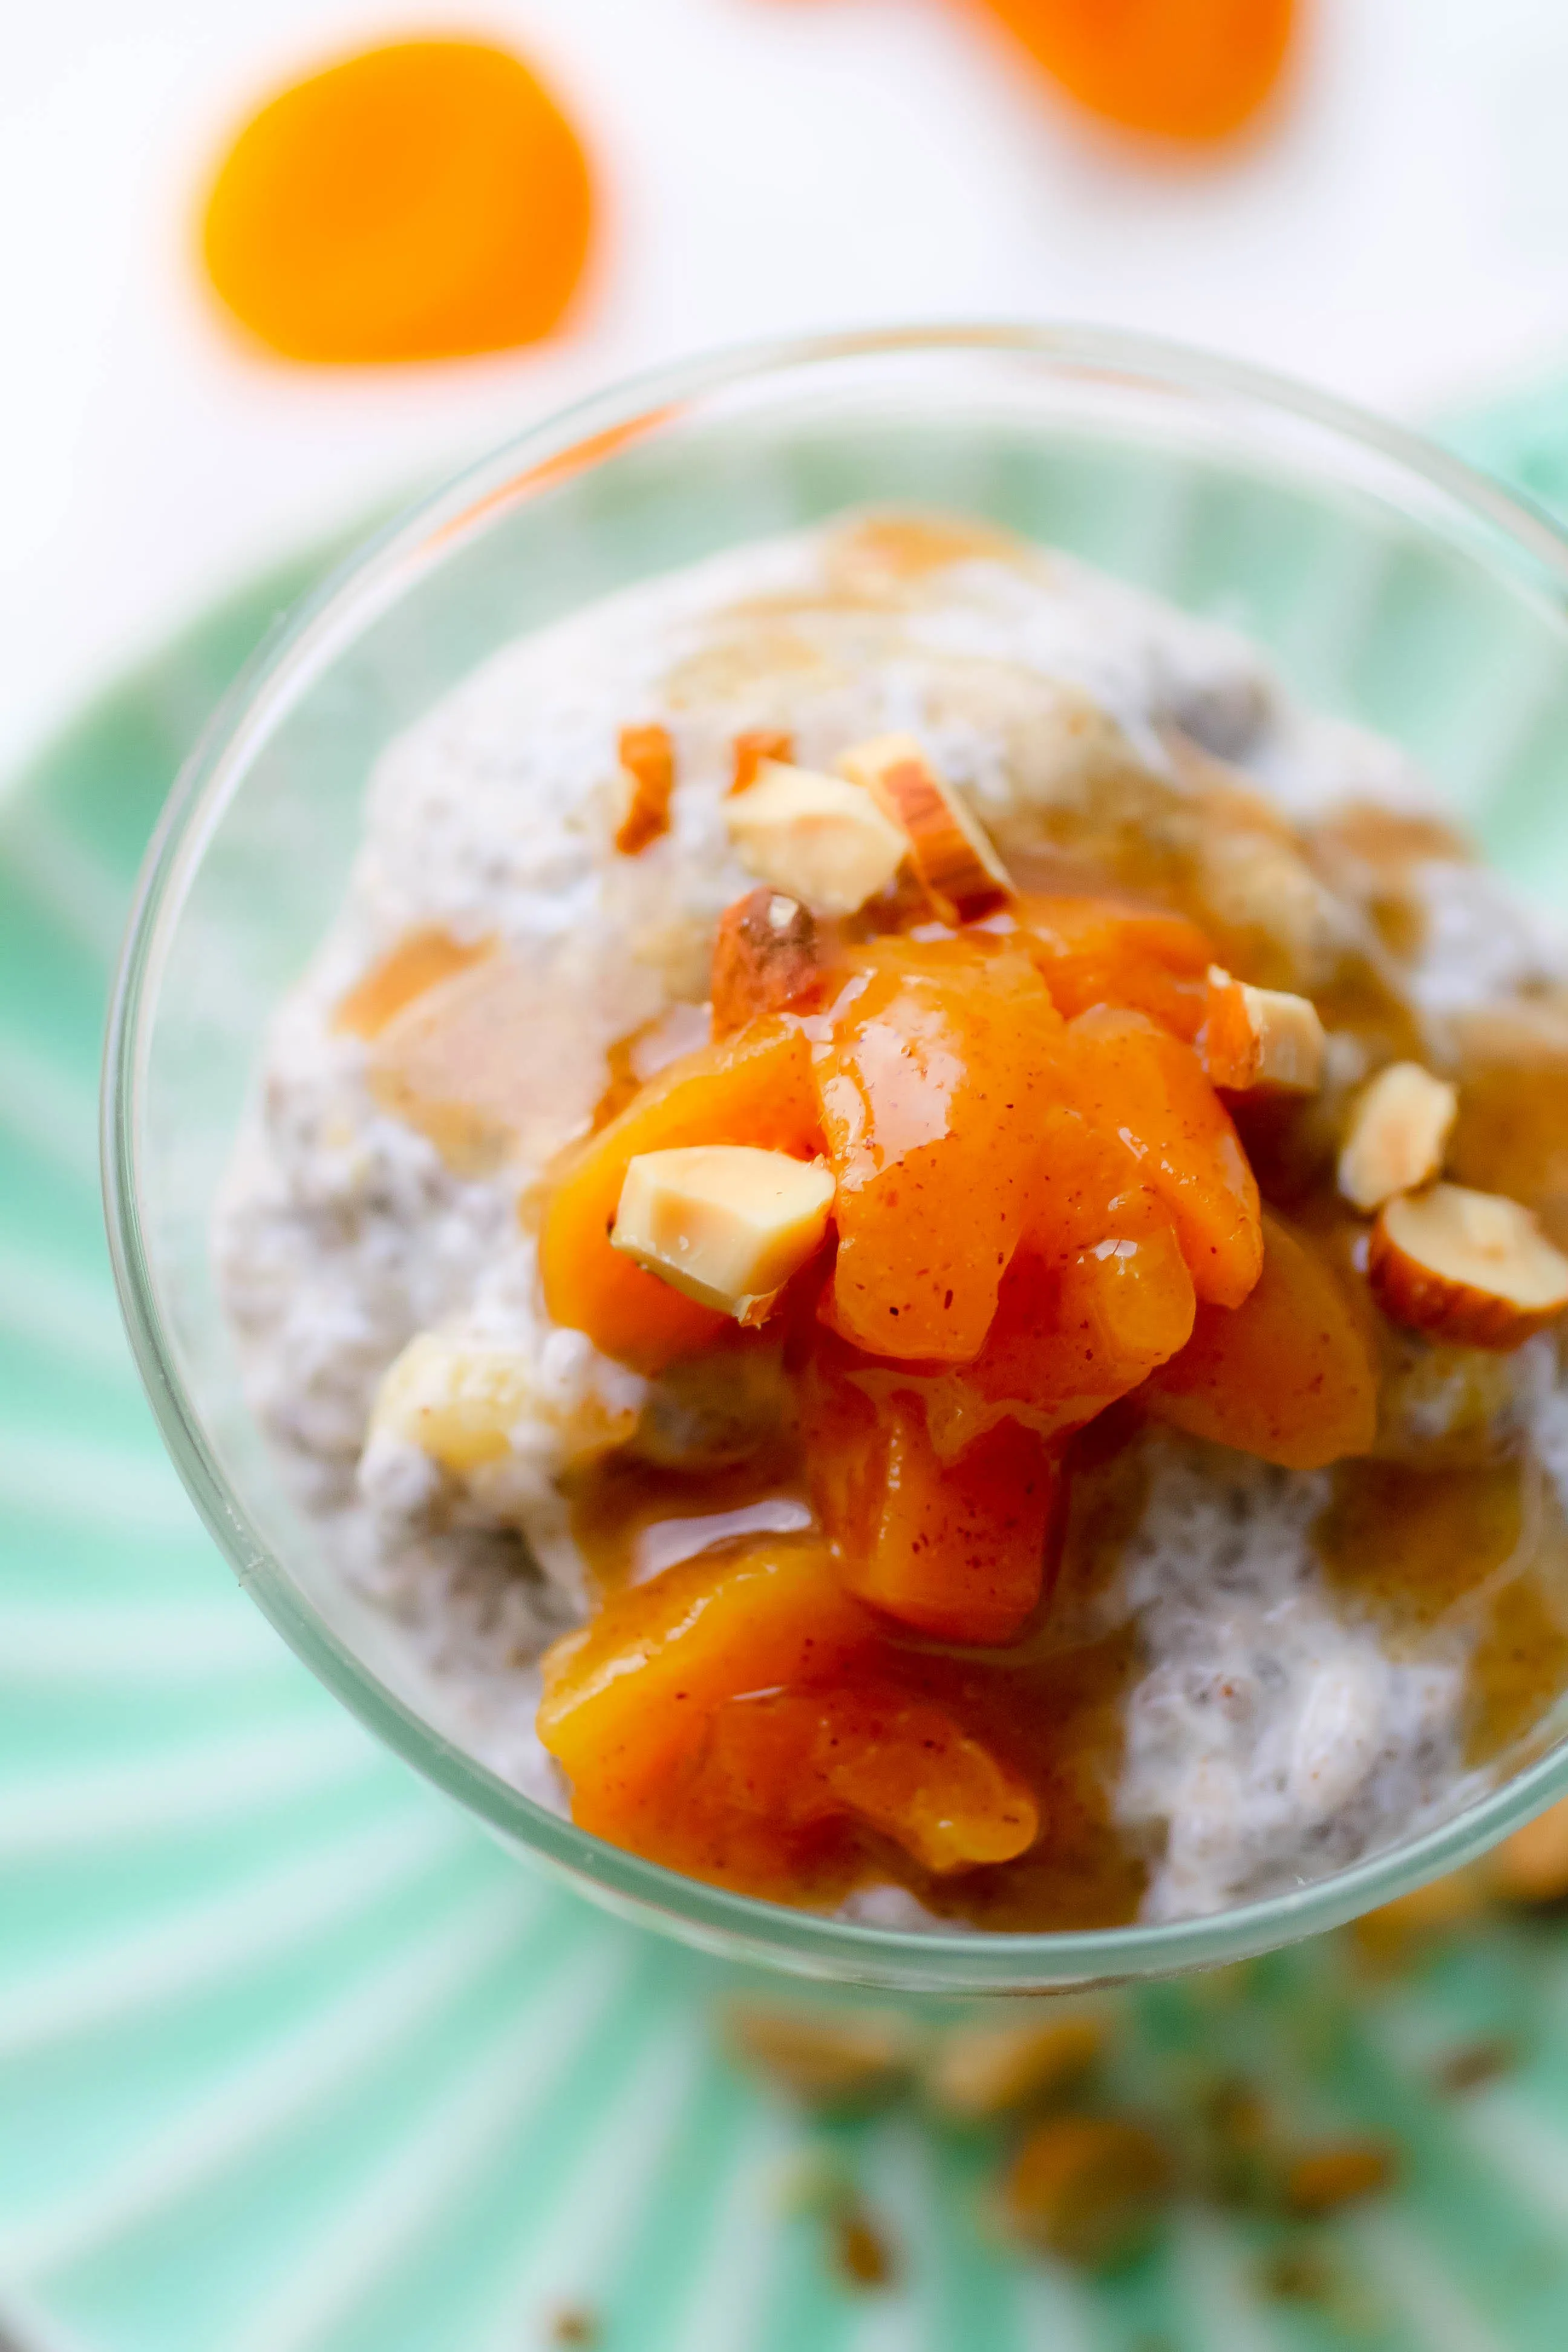 Almond-Apricot Breakfast Chia Pudding is a lovely, healthier breakfast option. Make a batch of Almond-Apricot Breakfast Chia Pudding for your morning meal!